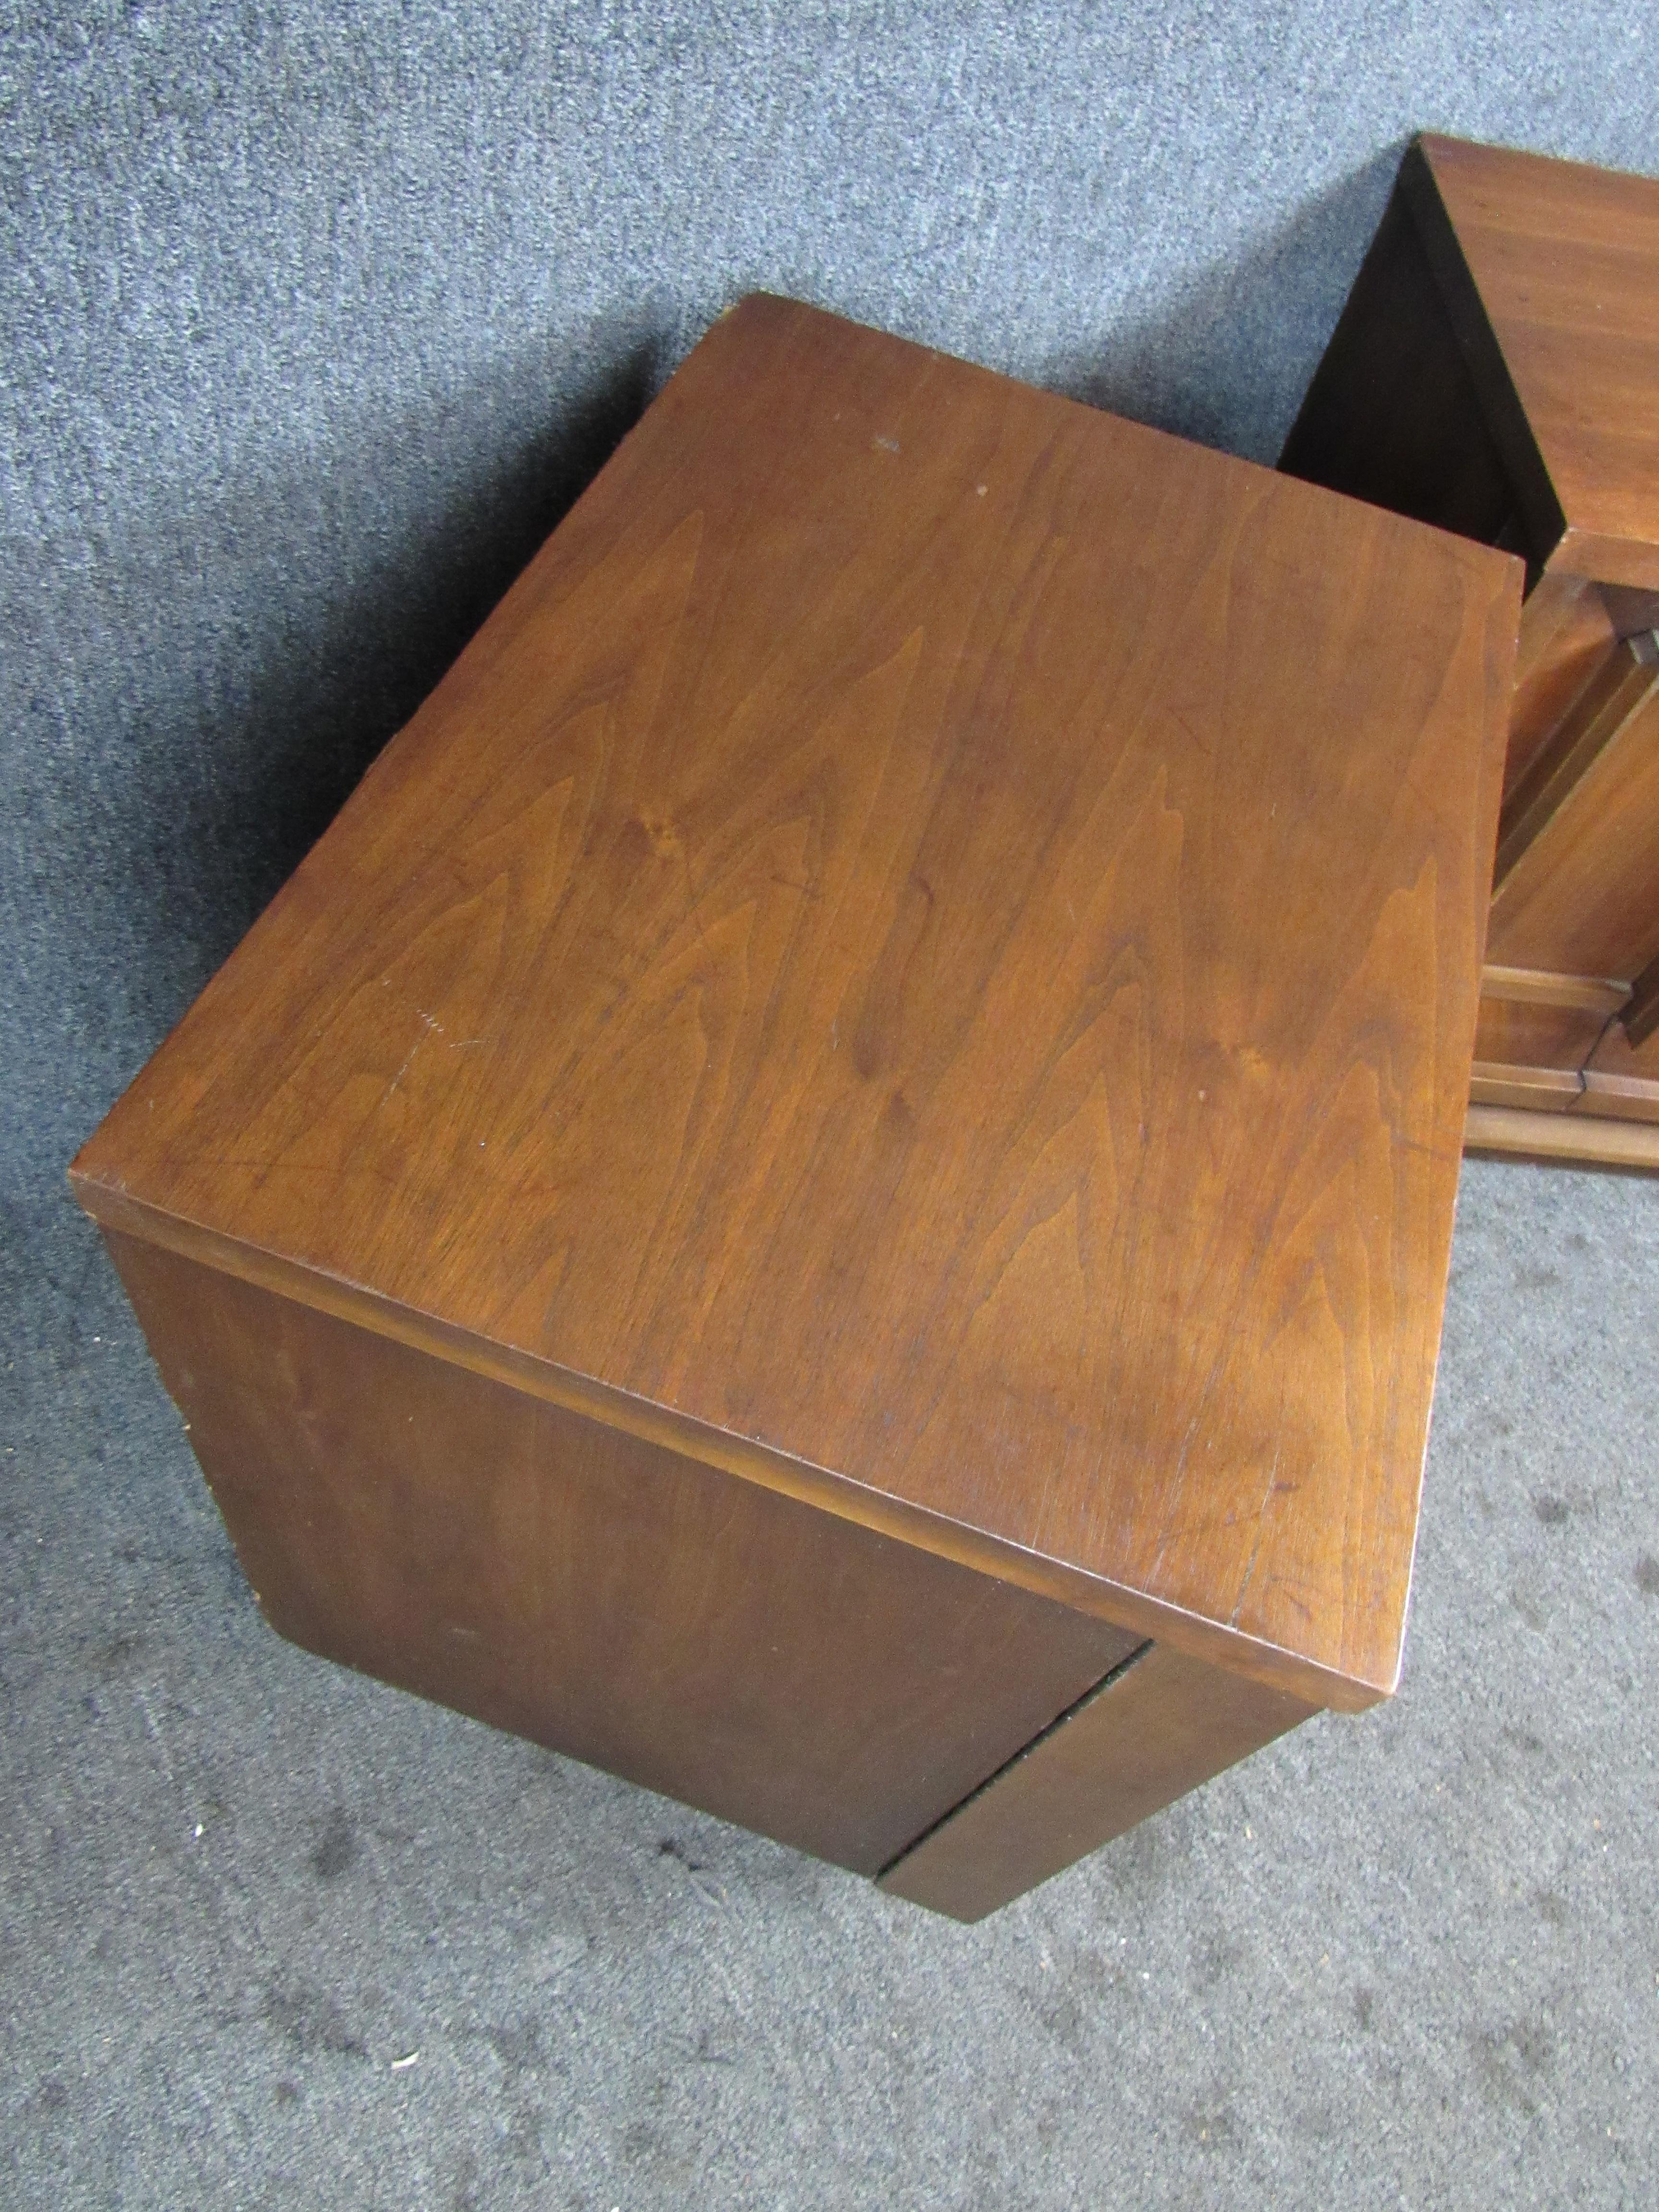 Midcentury Sculpted Walnut Nightstands In Good Condition For Sale In Brooklyn, NY